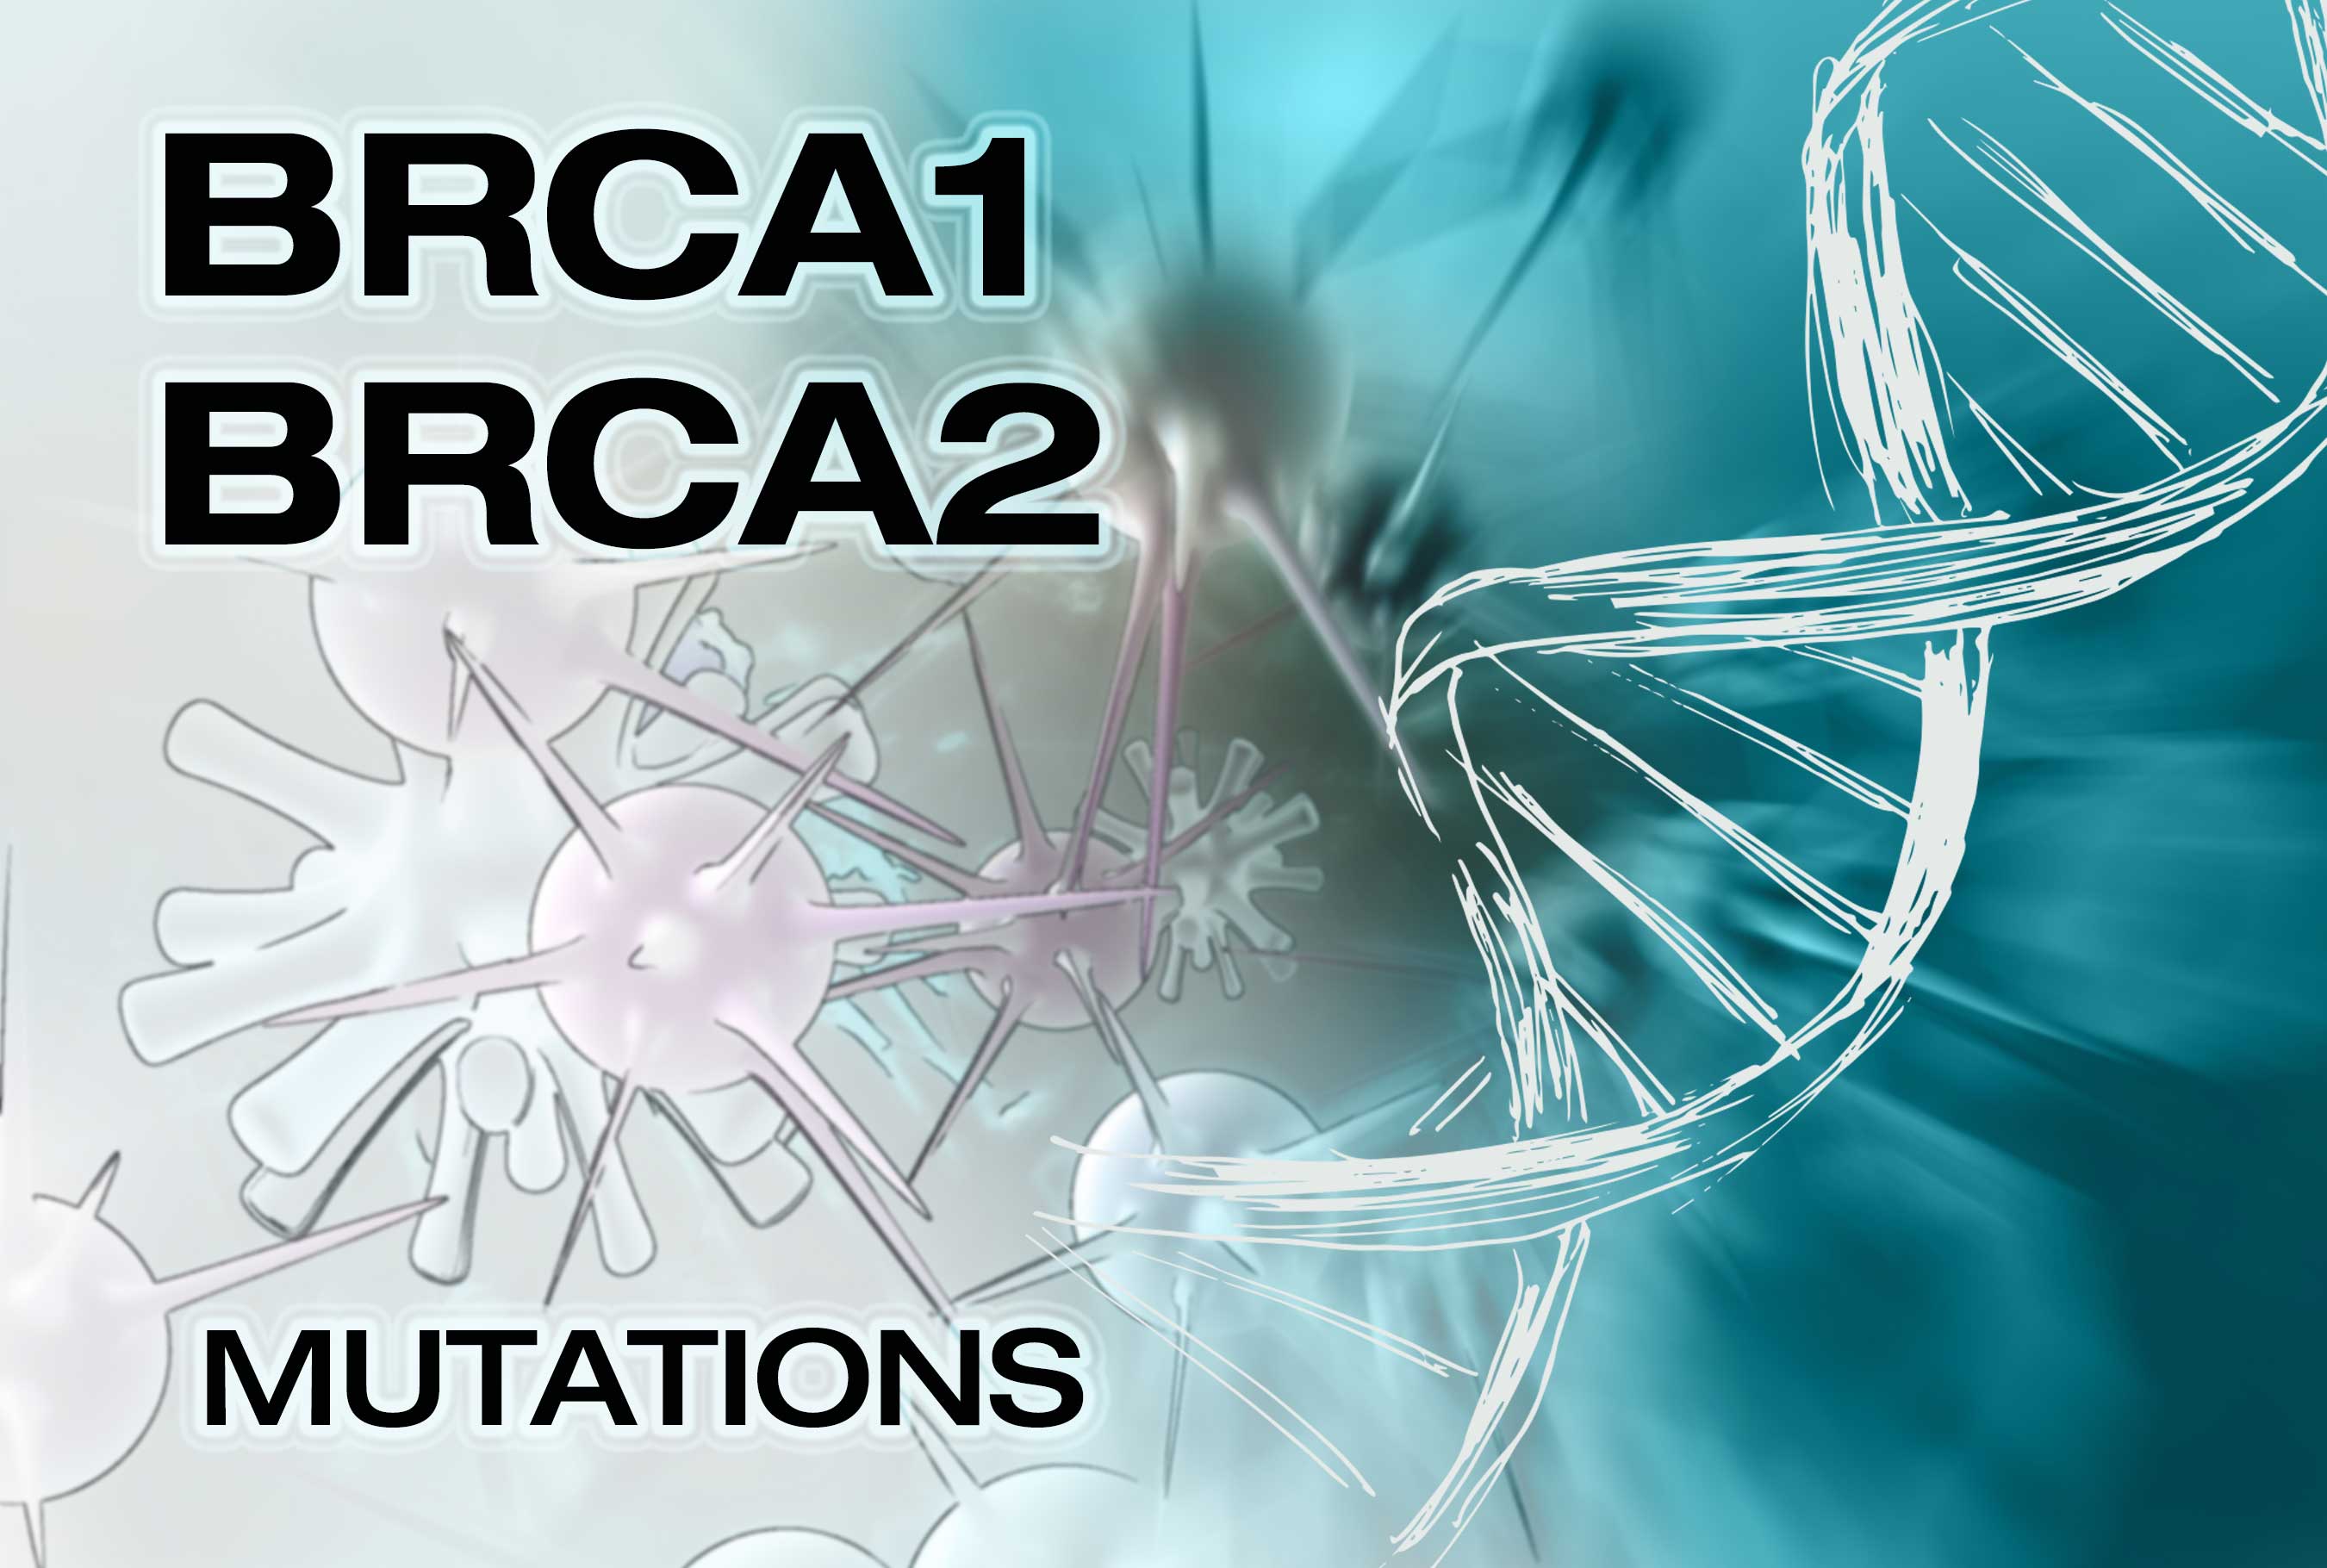 BRCA1 and BRCA2 (BReast CAncer)